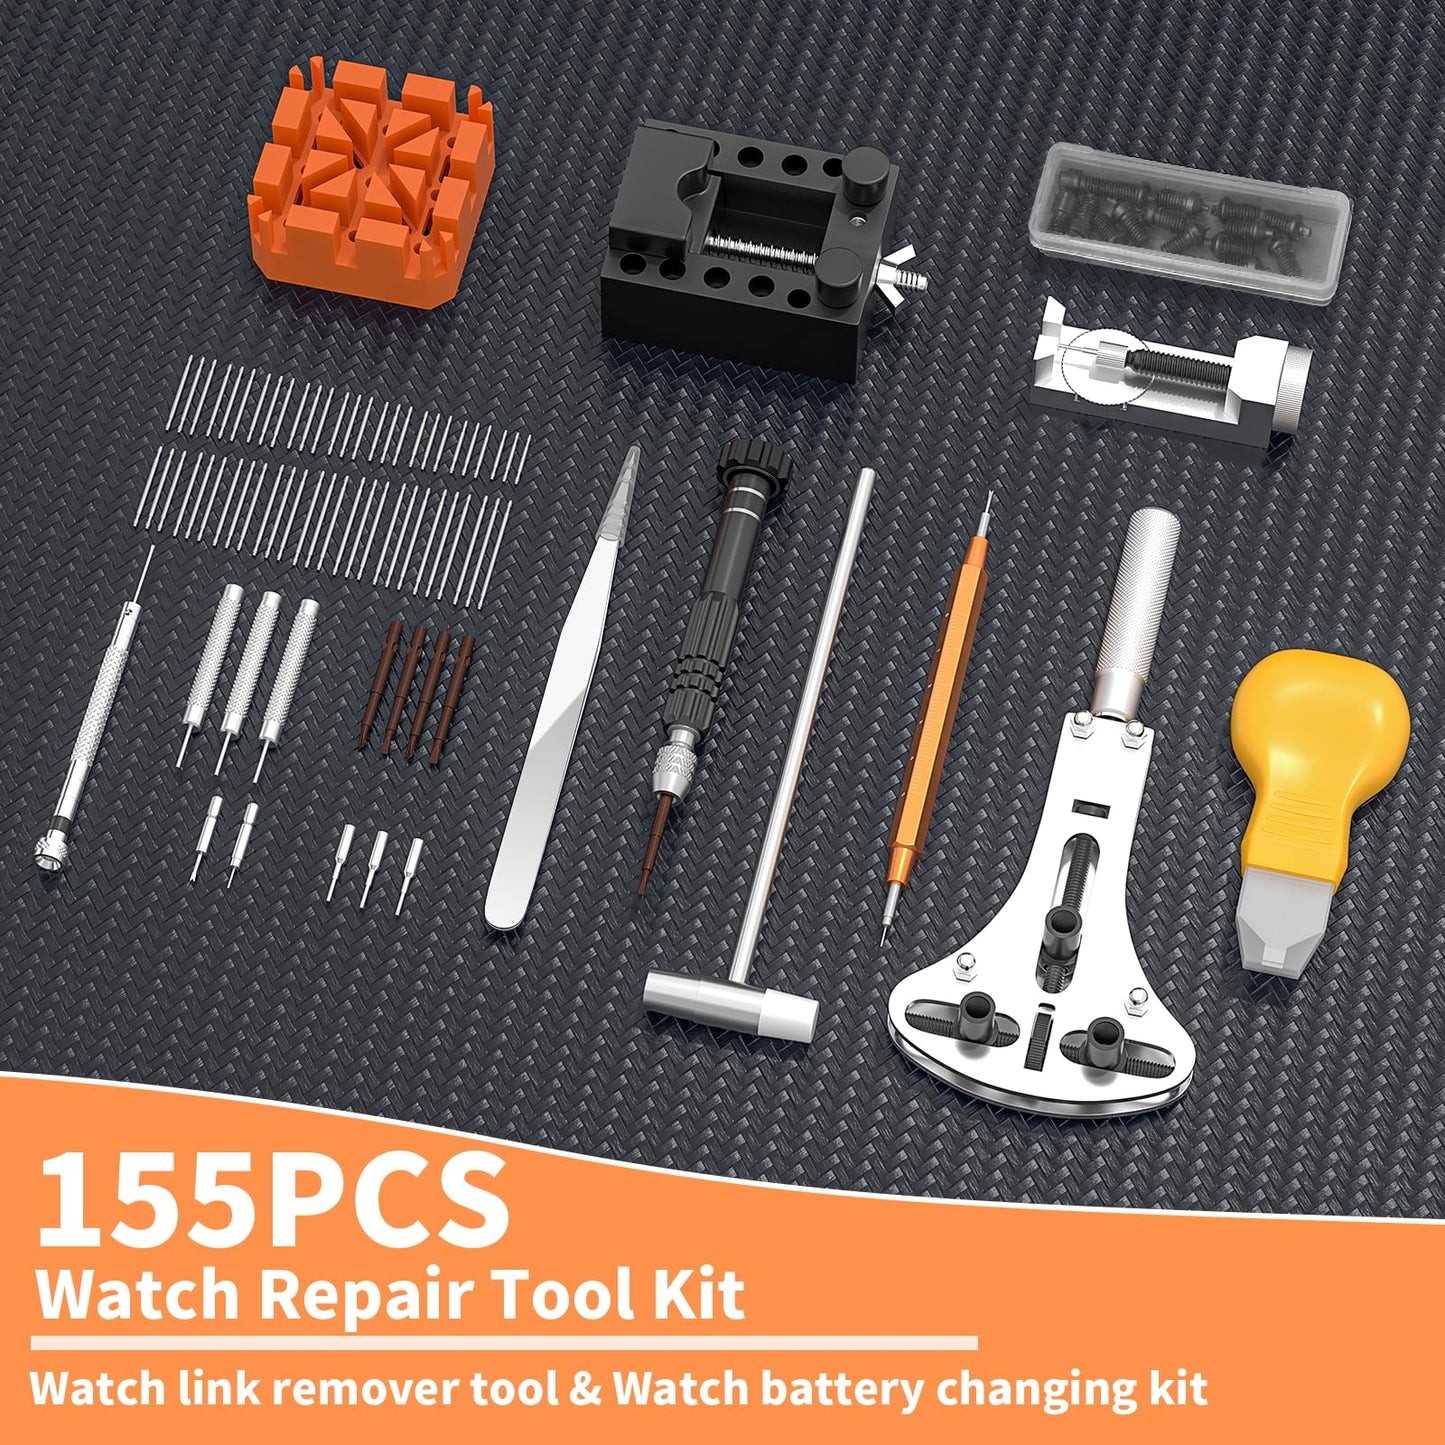 Watch Link Removal Kit, BYNIIUR Watch Repair Kit, Watch Case Opener Spring Bar Tools, Watch Battery Replacement Tool Kit, Watch Band Link Pin Tool Set with Carrying Case and Instruction Manual